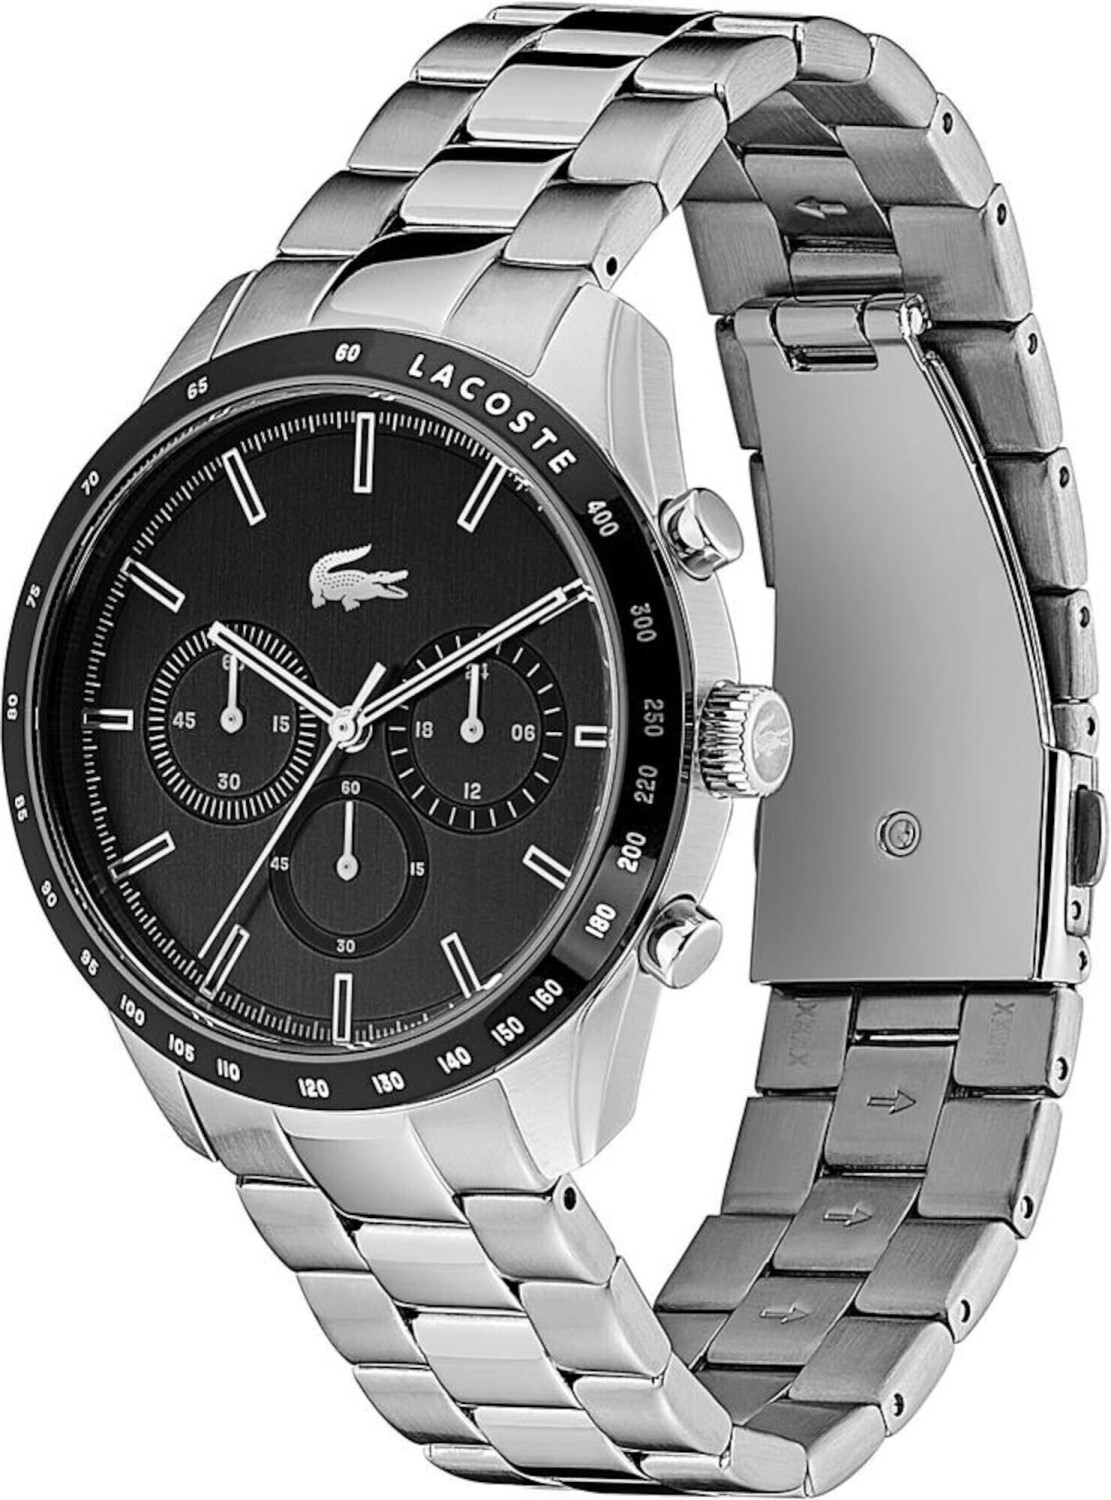 Buy Lacoste Boston Chronograph from £122.42 (Today) – Best Deals on